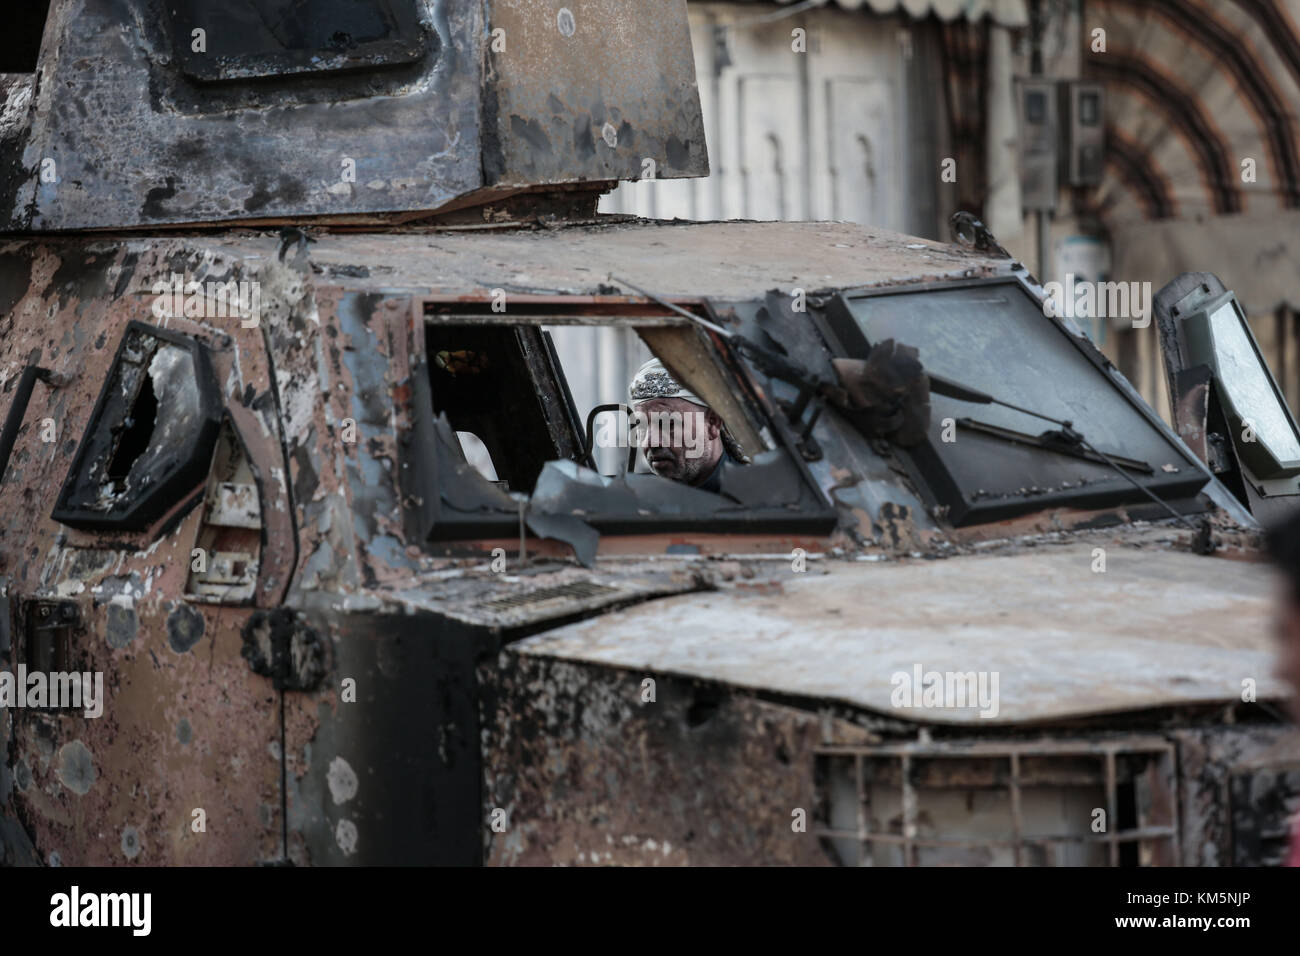 Sanaa, Yemen. 05th Dec, 2017. Yemeni man inspects a military vehicle destroyed in clashes between Houthi fighters and forces loyal to Yemen's former President Ali Abdullah Saleh in Sanaa, Yemen, 05 December 2017. Saleh was killed by Houthi rebels on Monday. Credit: Hani Al-Ansi/dpa/Alamy Live News Stock Photo